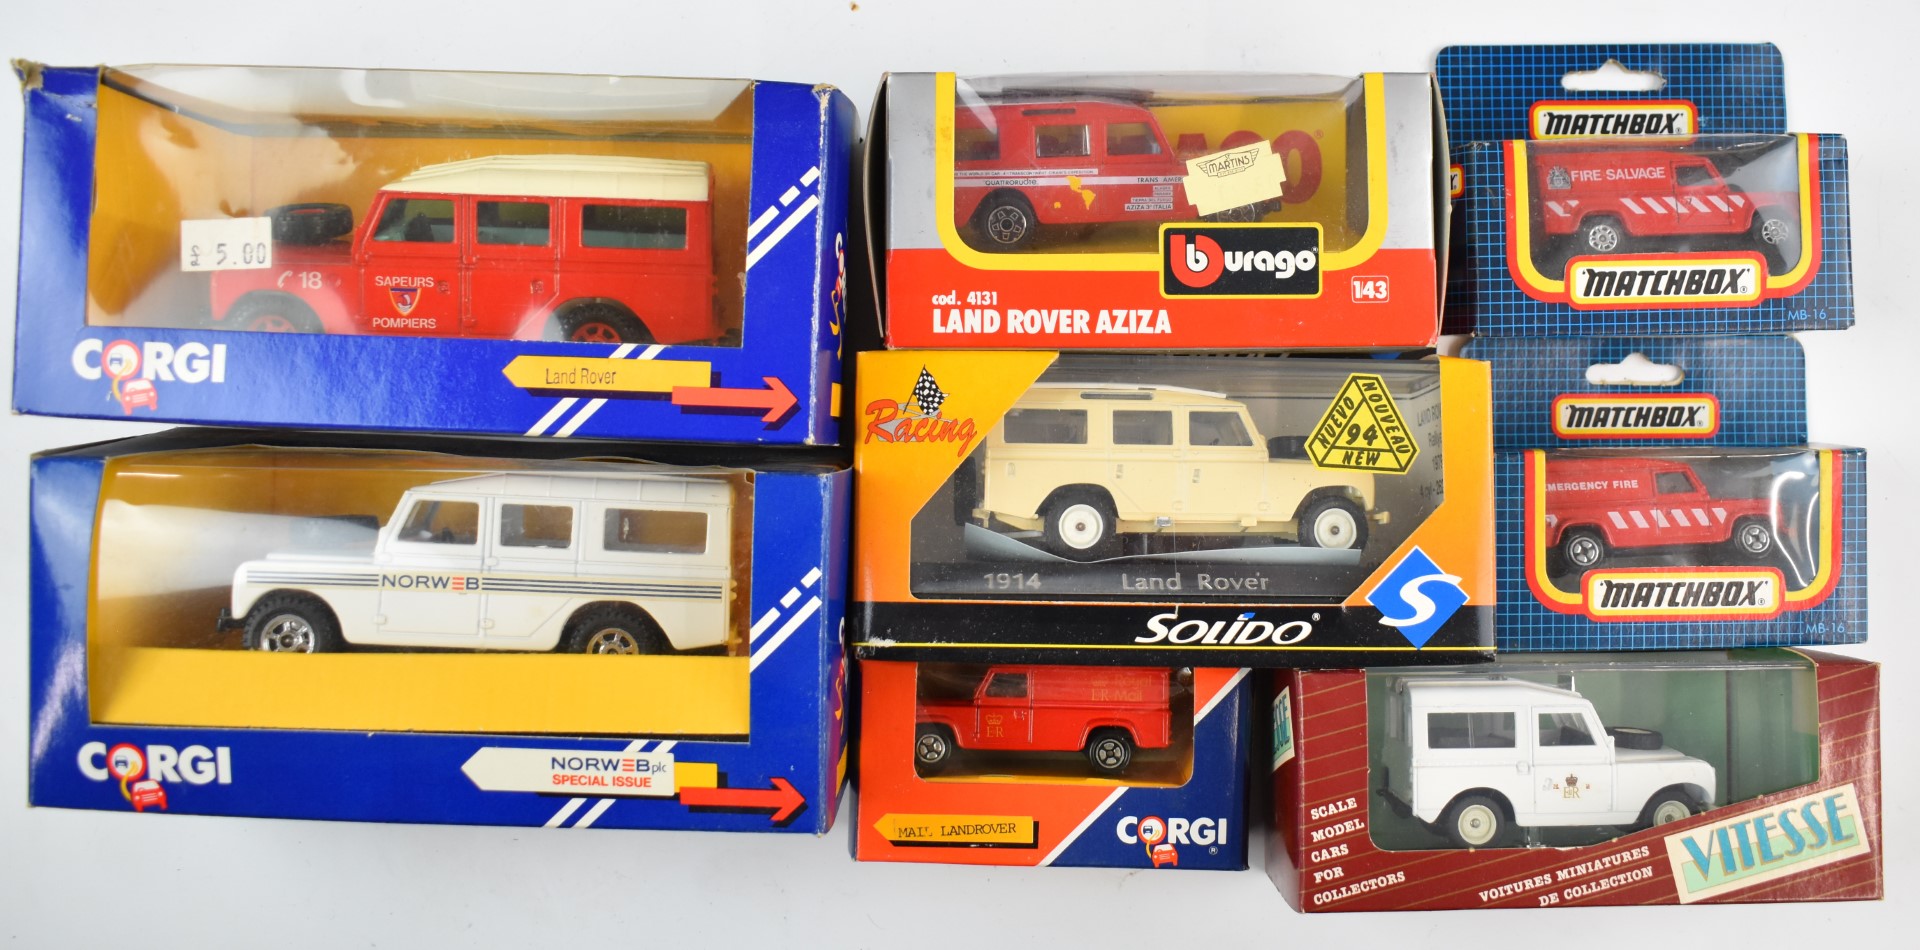 A collection of diecast model Land Rovers to include Corgi, Solido, Active Response, Matchbox and - Image 3 of 6